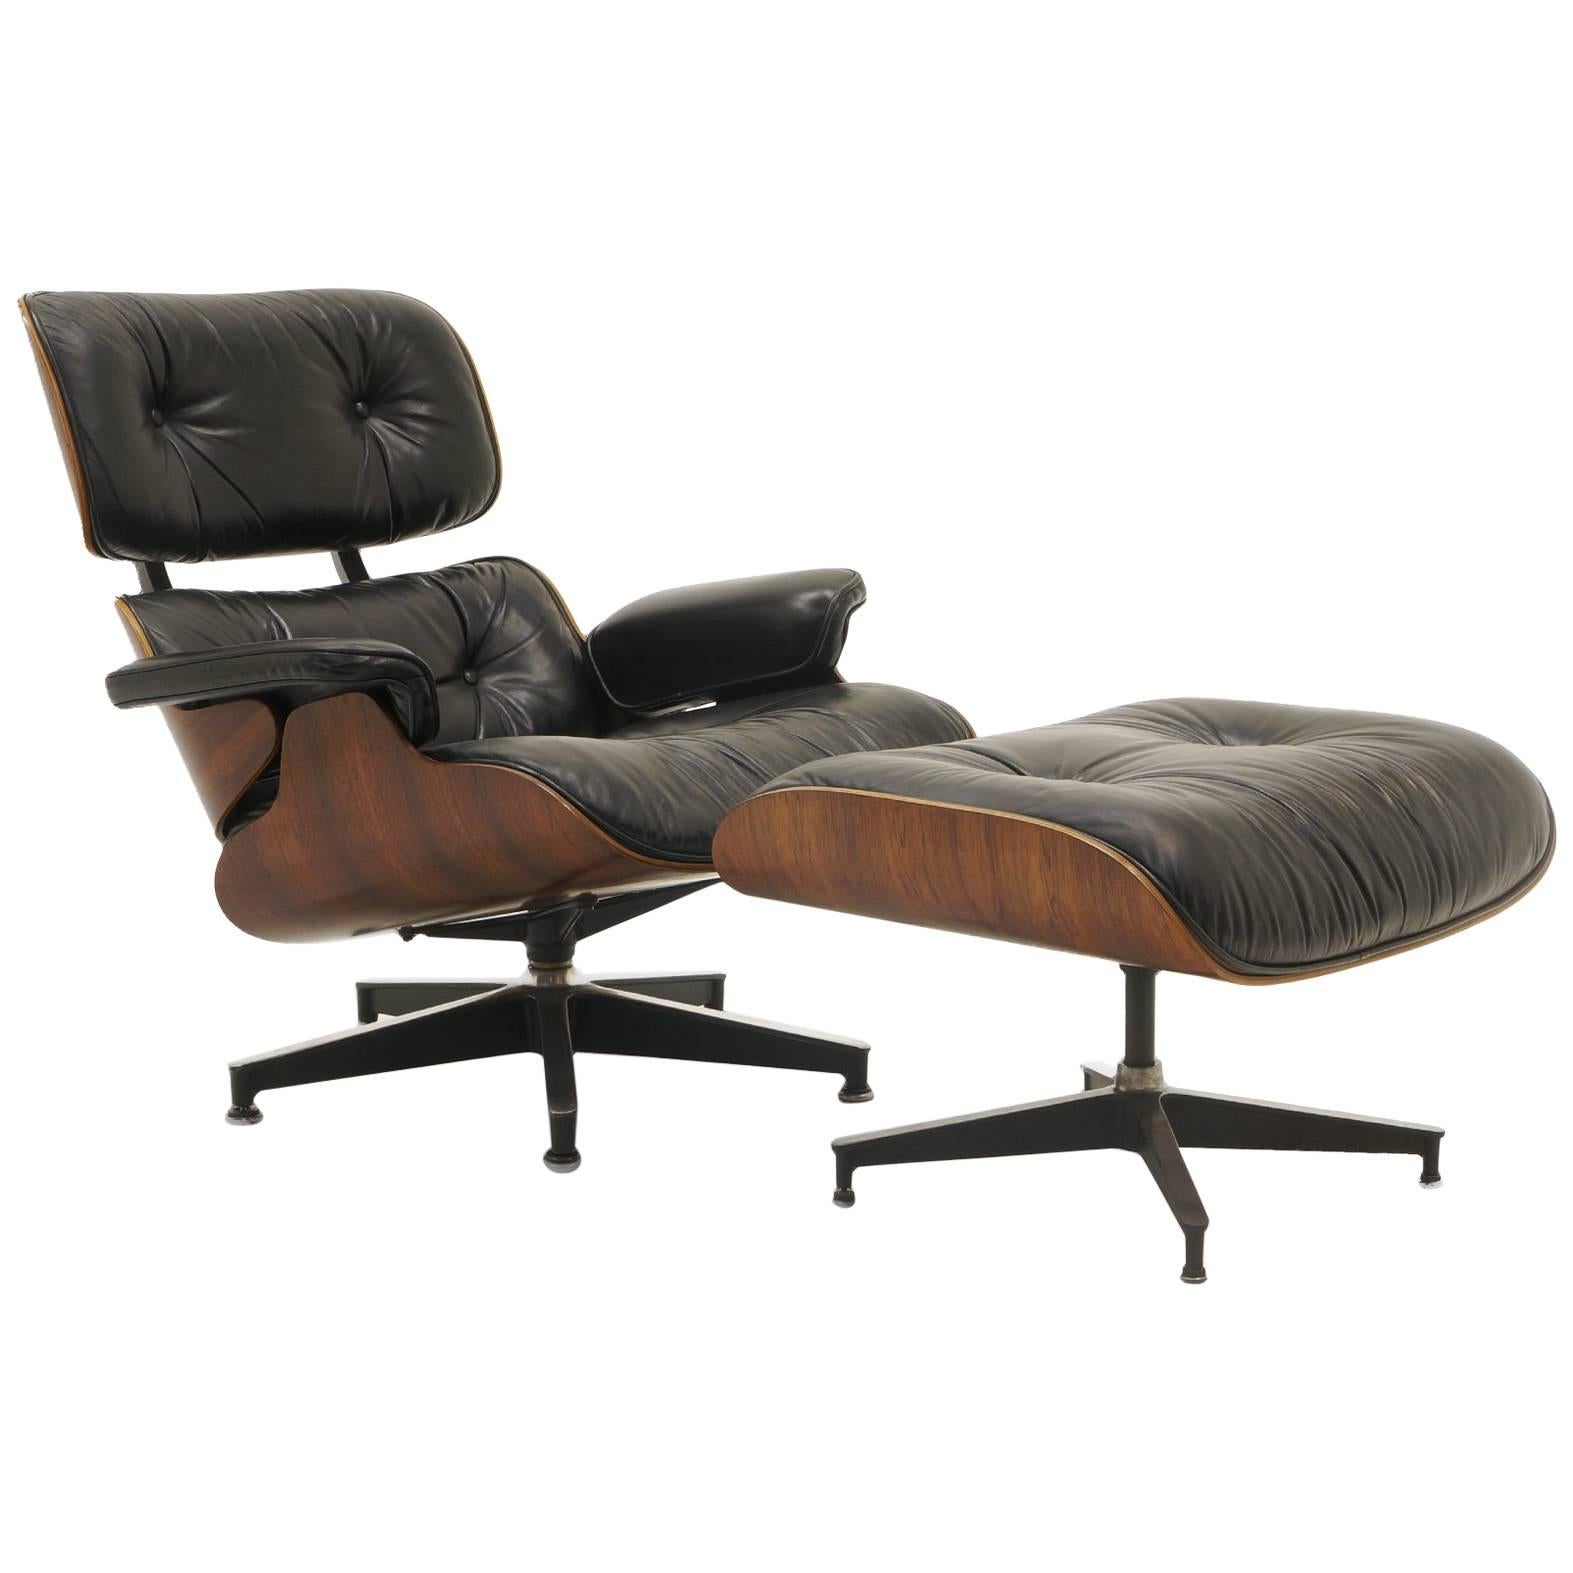 Original Charles and Ray Eames Brazilian Rosewood Lounge Chair and Ottoman  